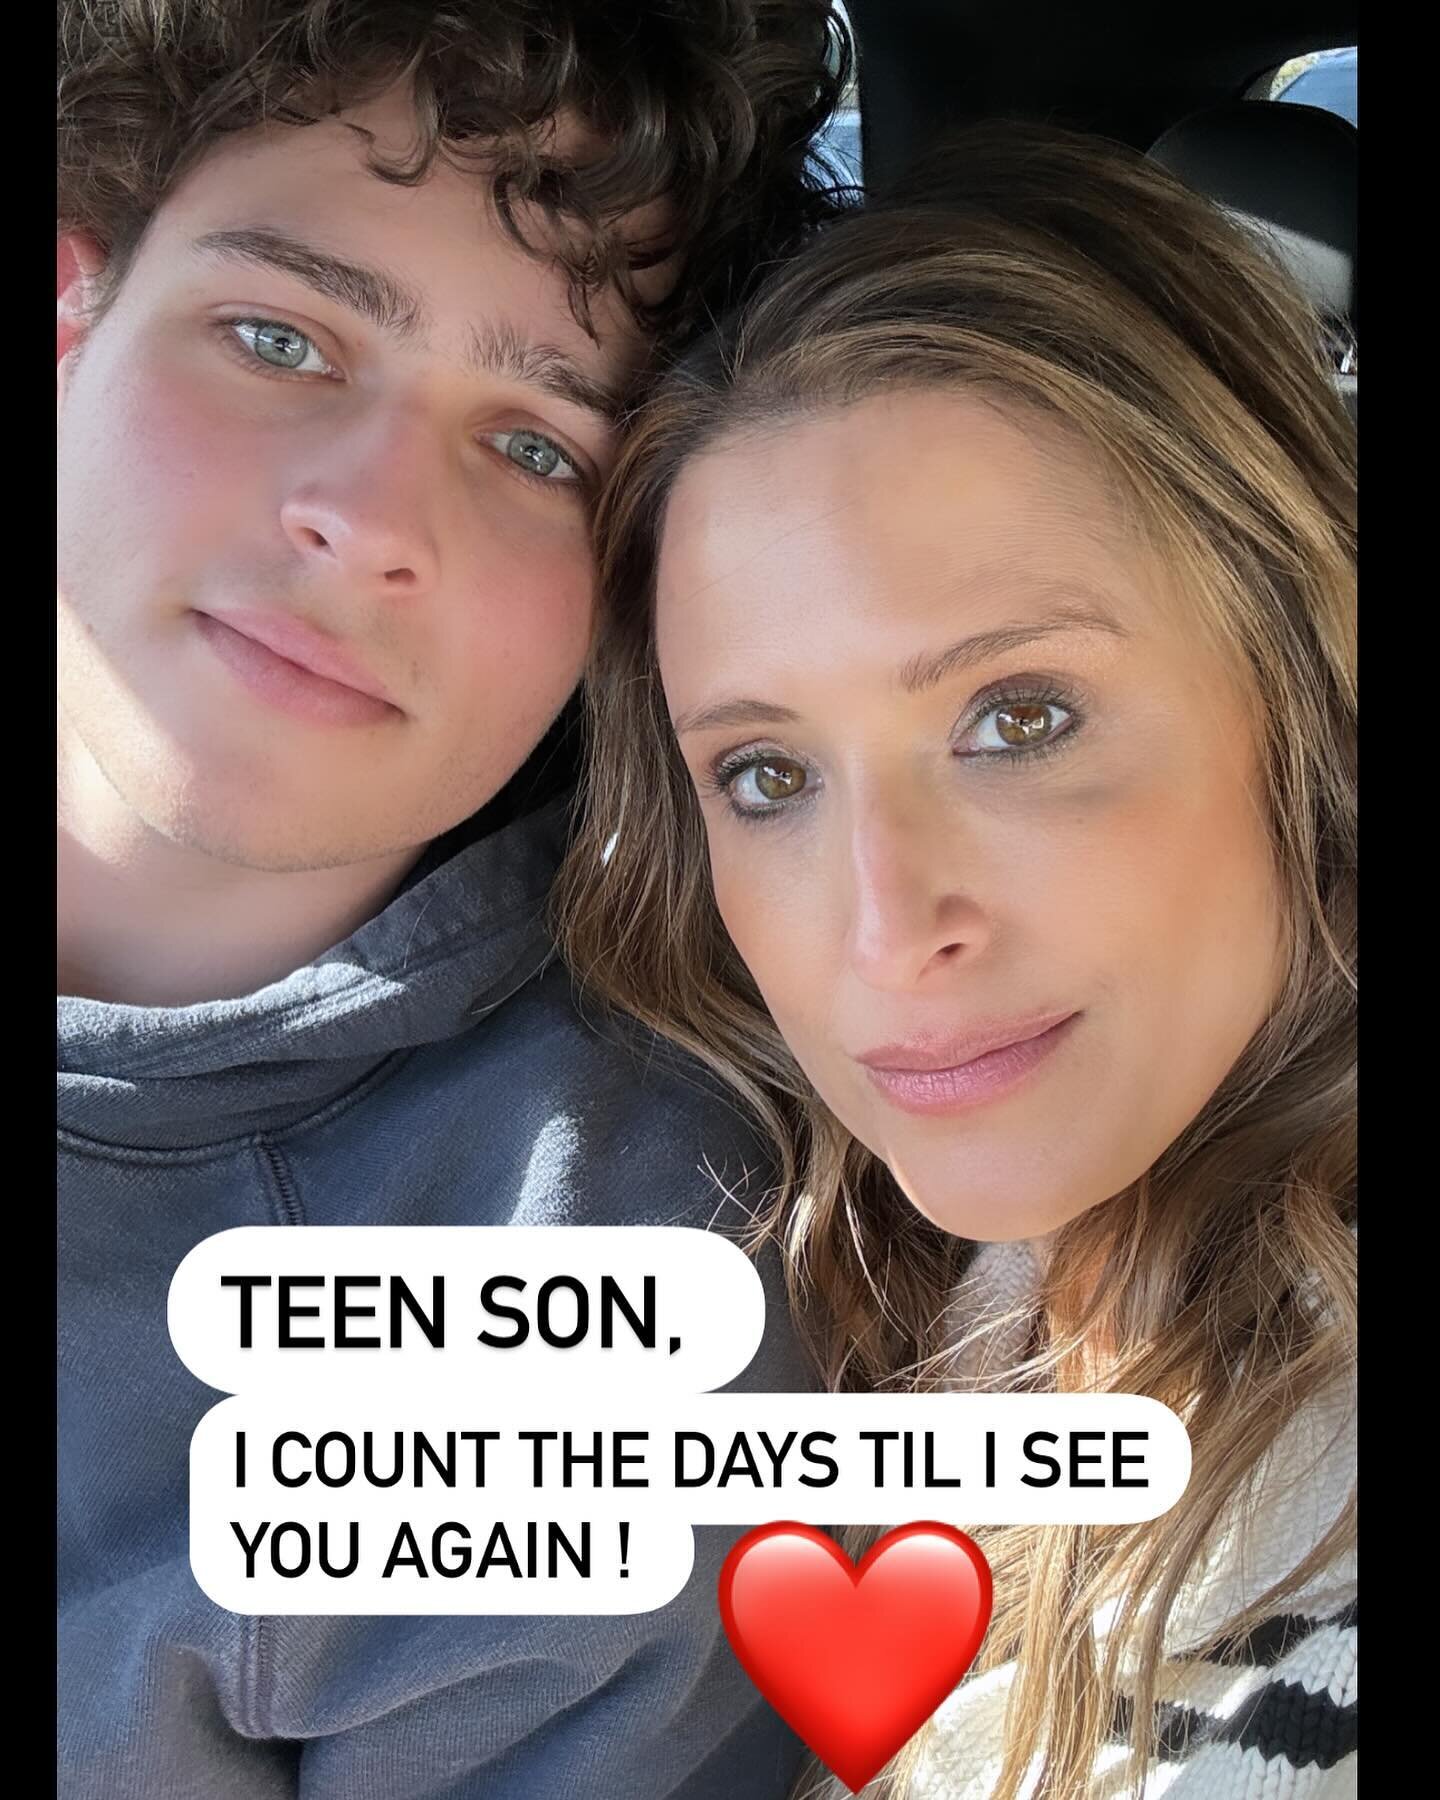 1/2 EMPTY NEST STINGS EVERY TIME! 

Teen son was home from freshman year of college&hellip;last four days of his spring break! 

He left two days ago! I&rsquo;ve been in the &ldquo;blas&rdquo;&hellip;there is no sugar coating. It stings! 

Type a ❤️ 